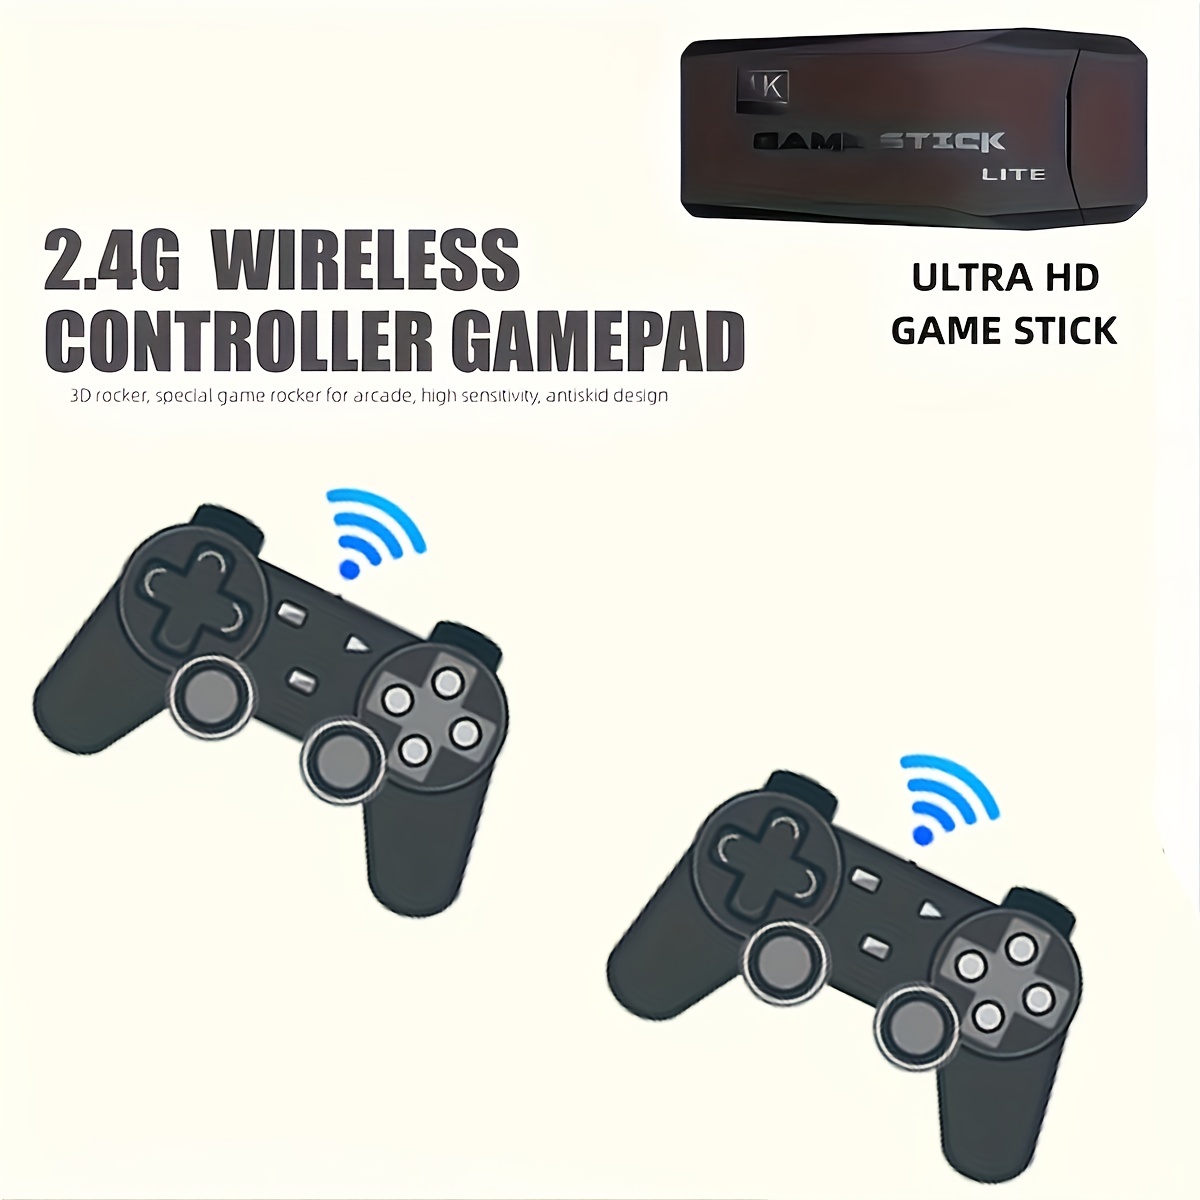 

M8 Portable Game Console: Home 2 Player Game Console, Classic Retro Wireless Video Game Stick, 2.4g Wireless Controller Plug And Play, The Best Choice For Gift Giving Christmas Gift